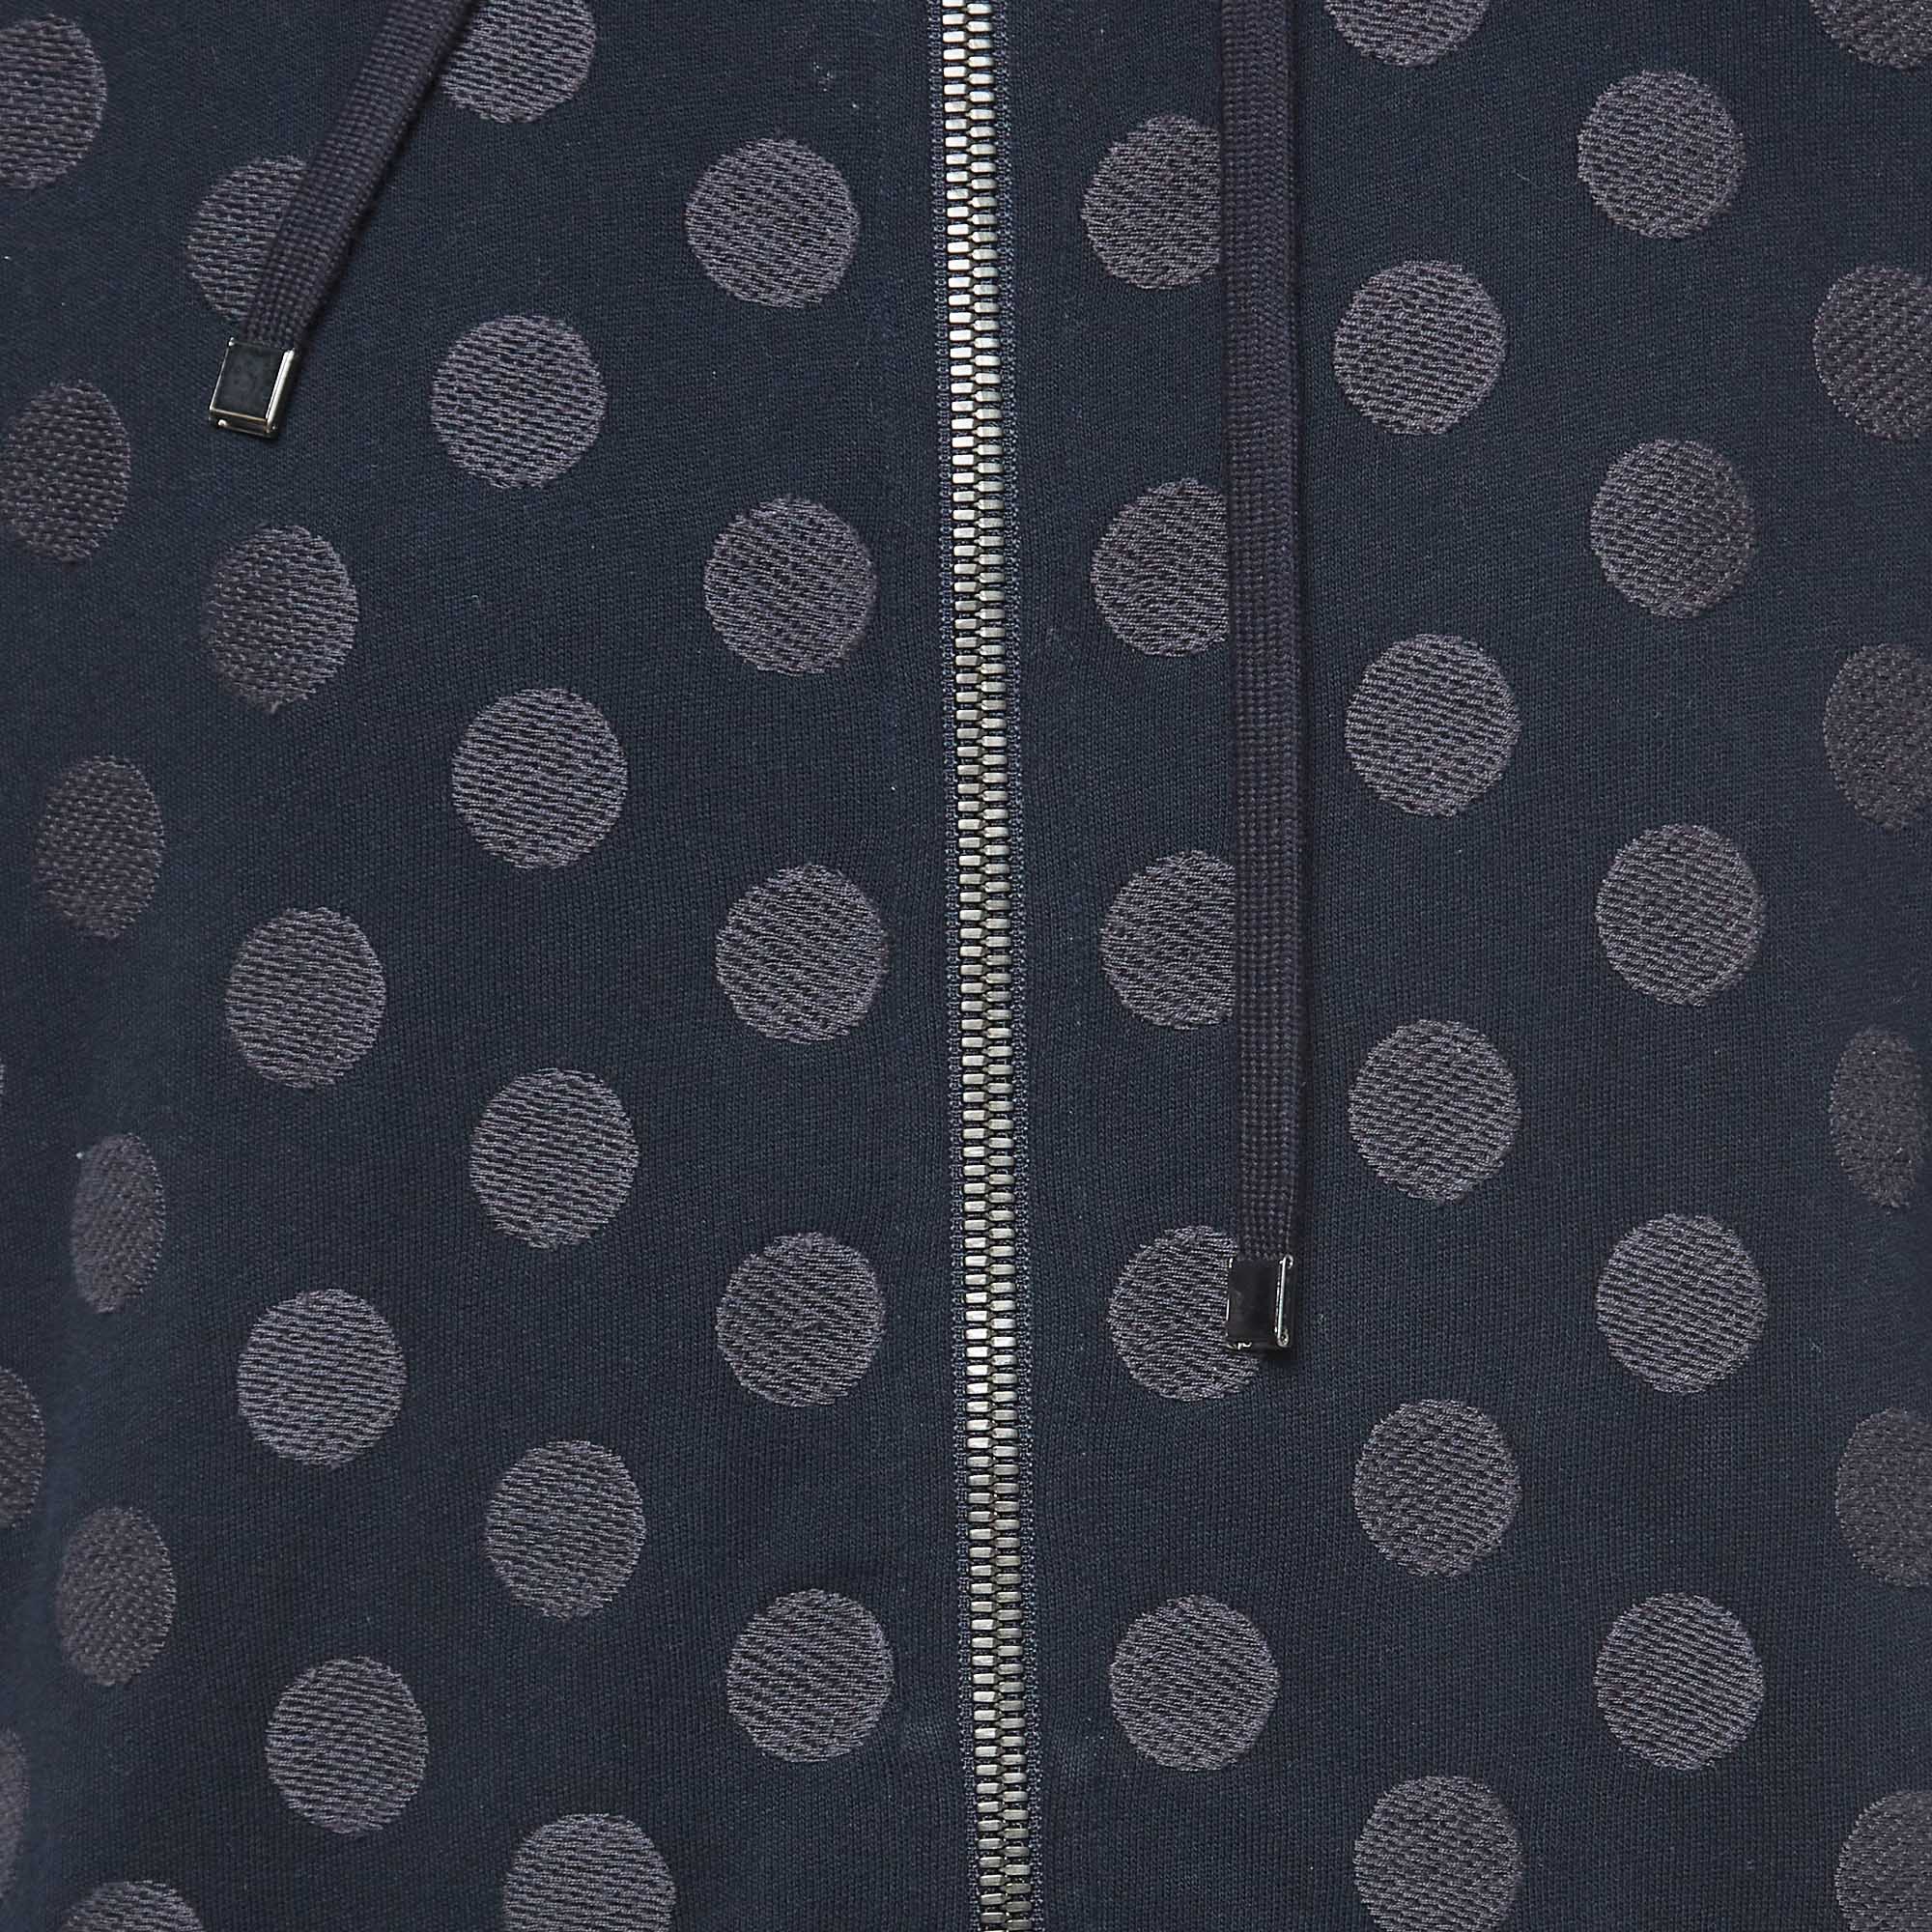 Dolce & Gabbana Navy Blue Polka Dotted Cotton Zip Front Hooded Jacket L